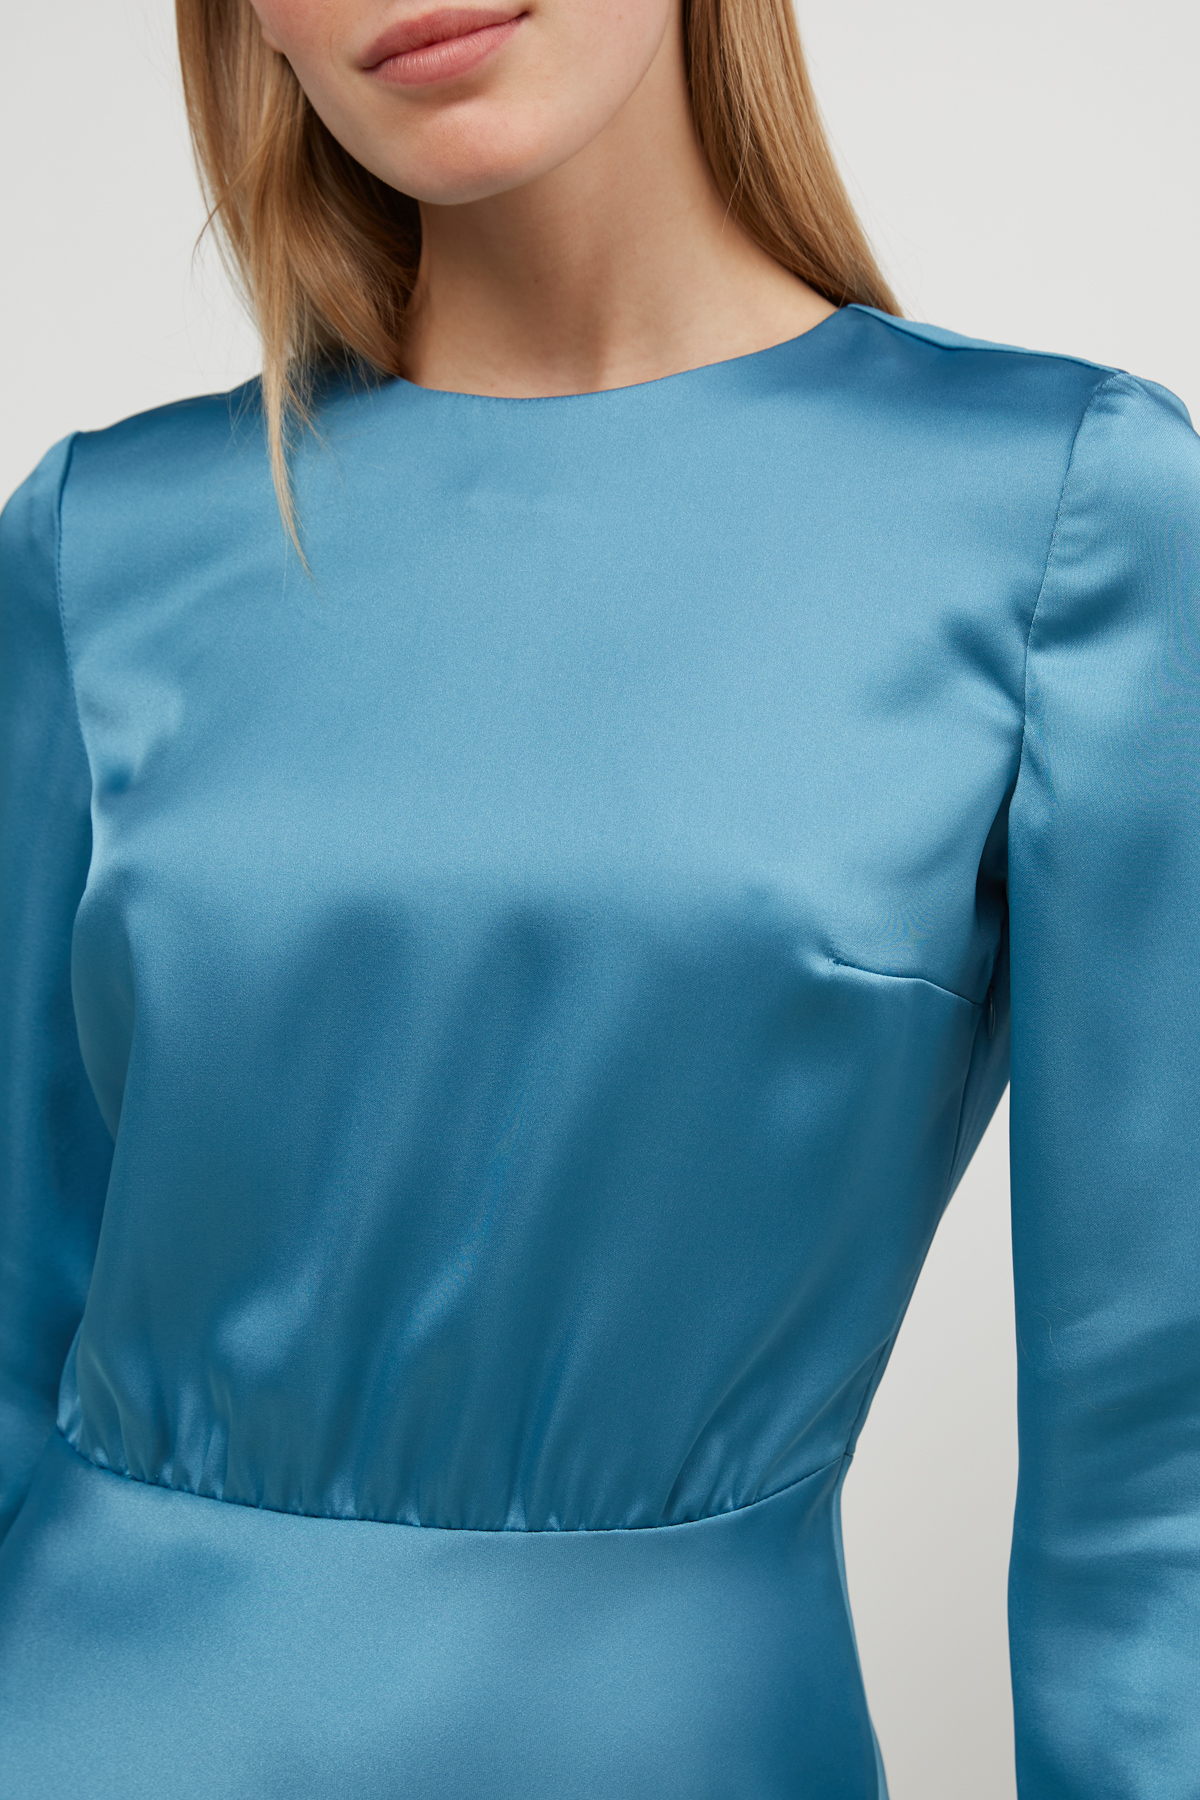 Short blue dress in satin with long sleeves, photo 3